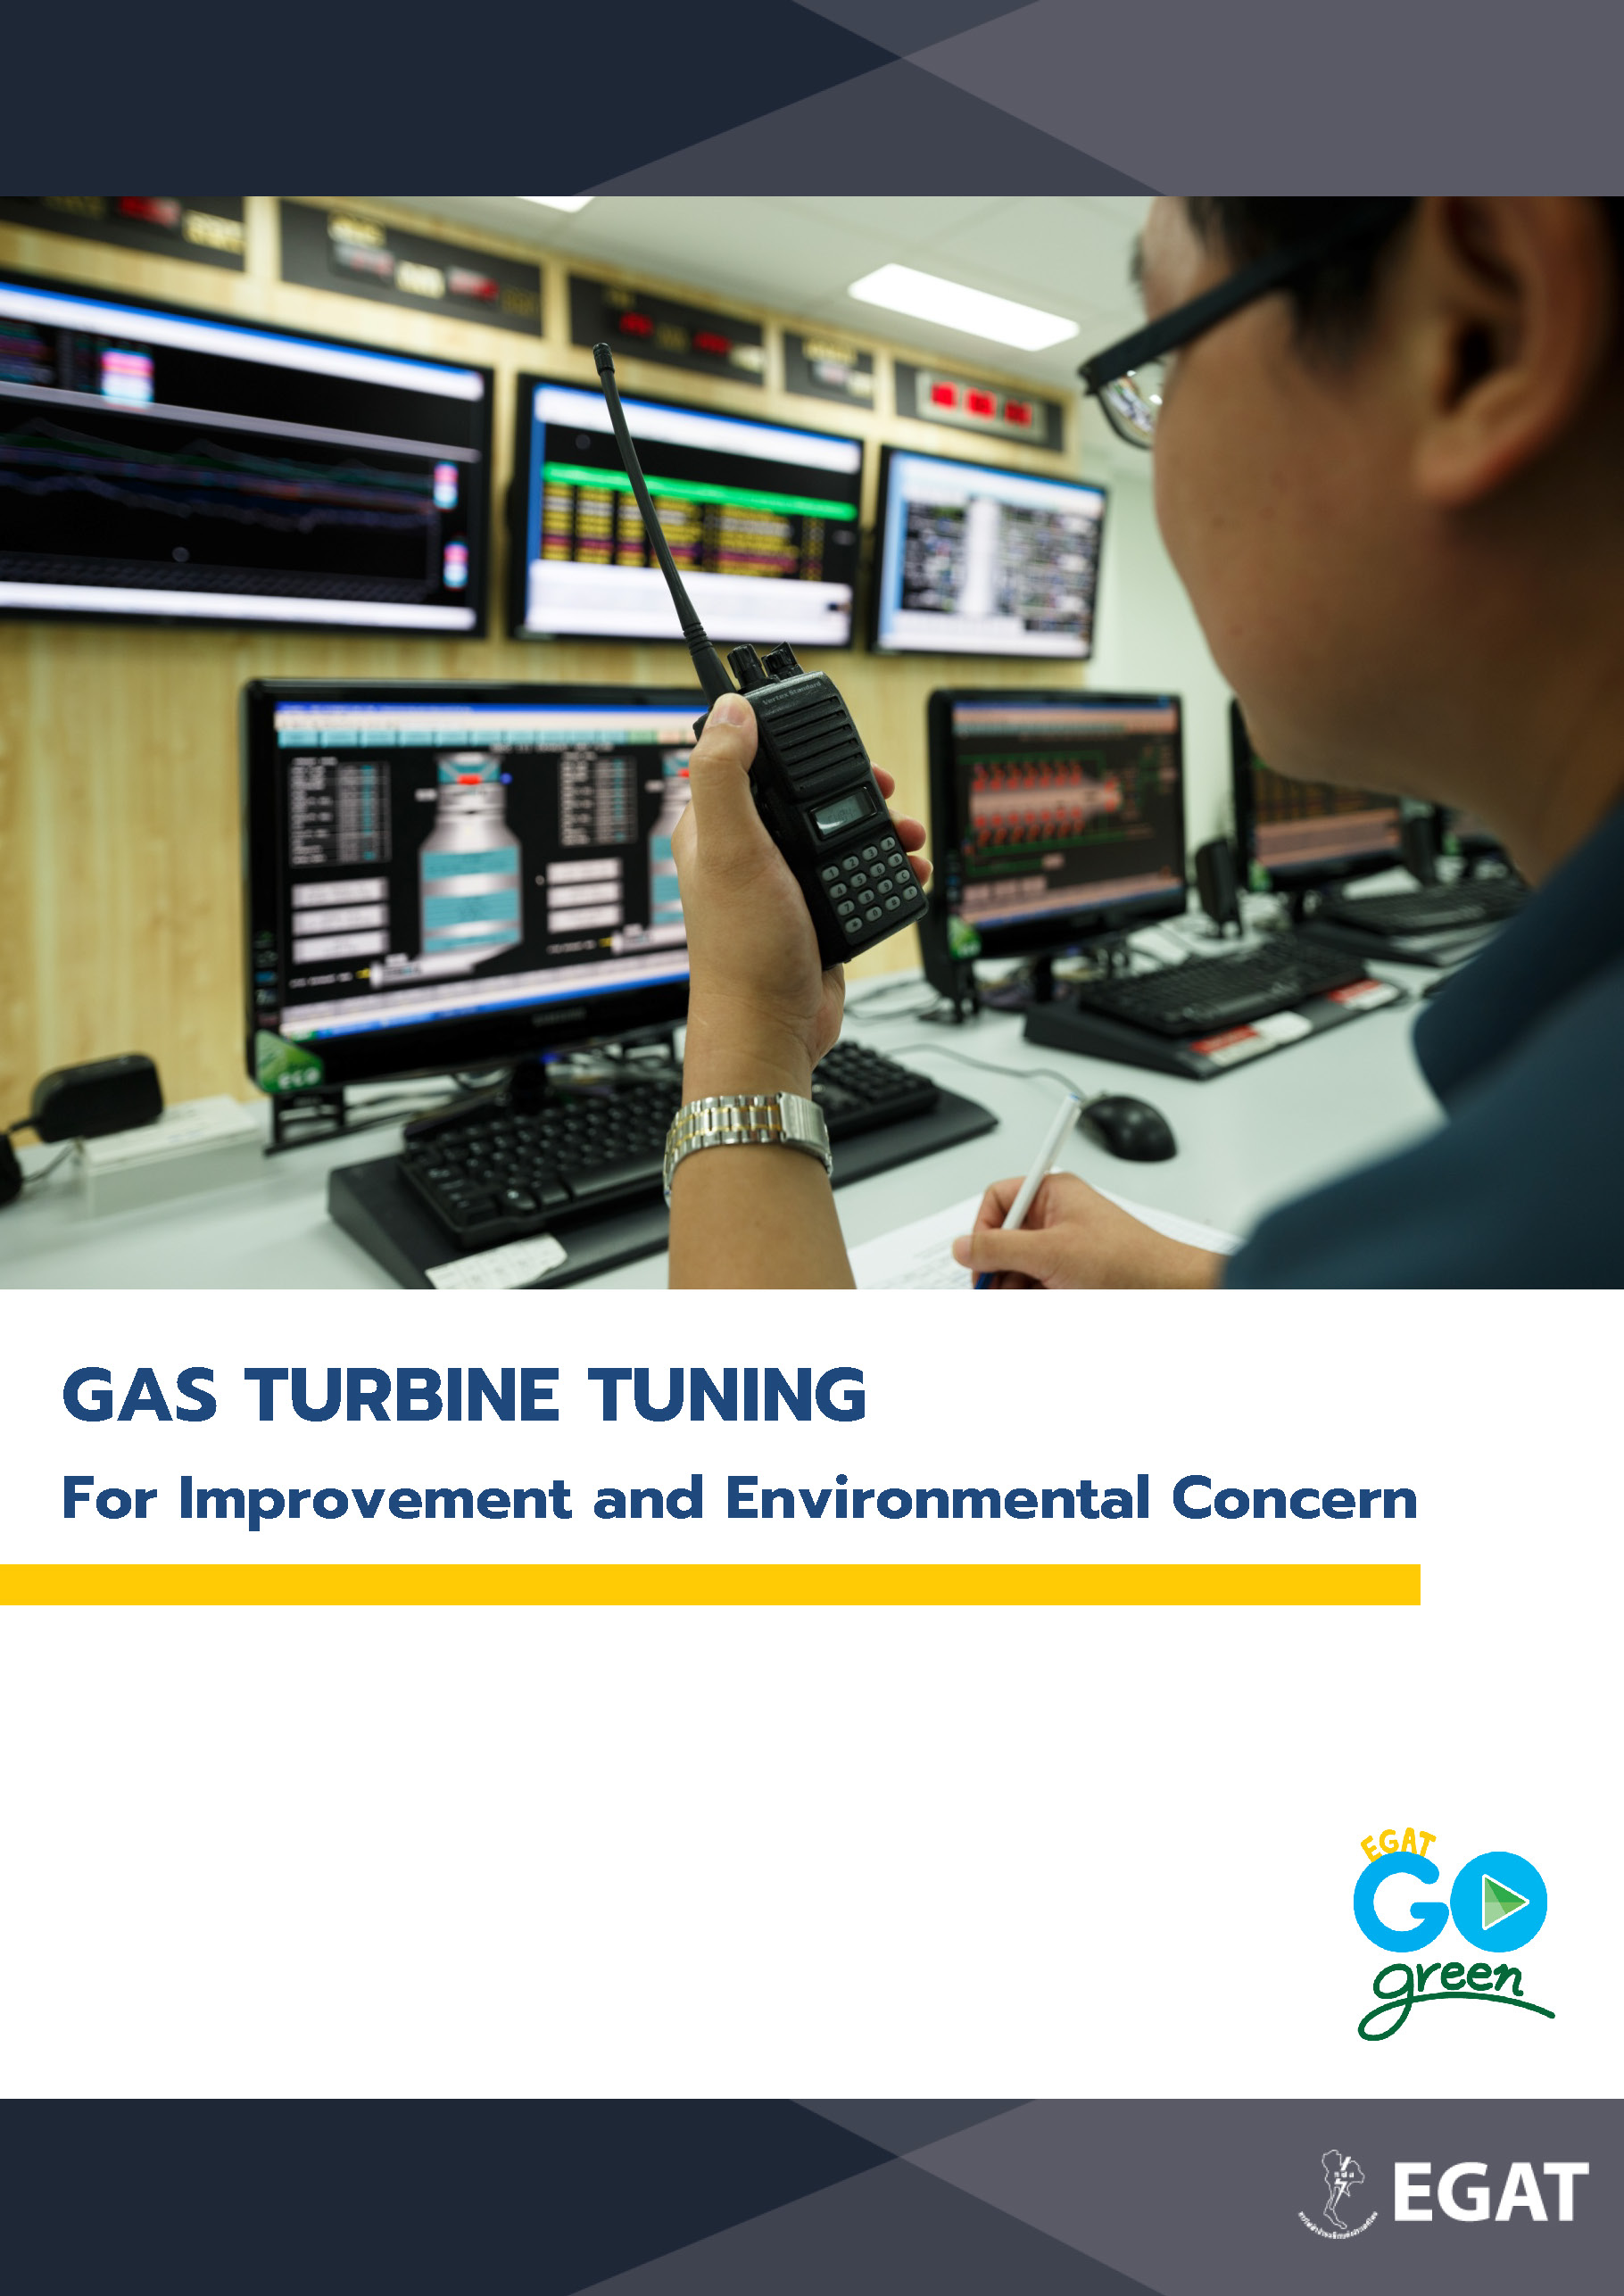 Gas Turbine Tuning For Improvement and Environmental Concern